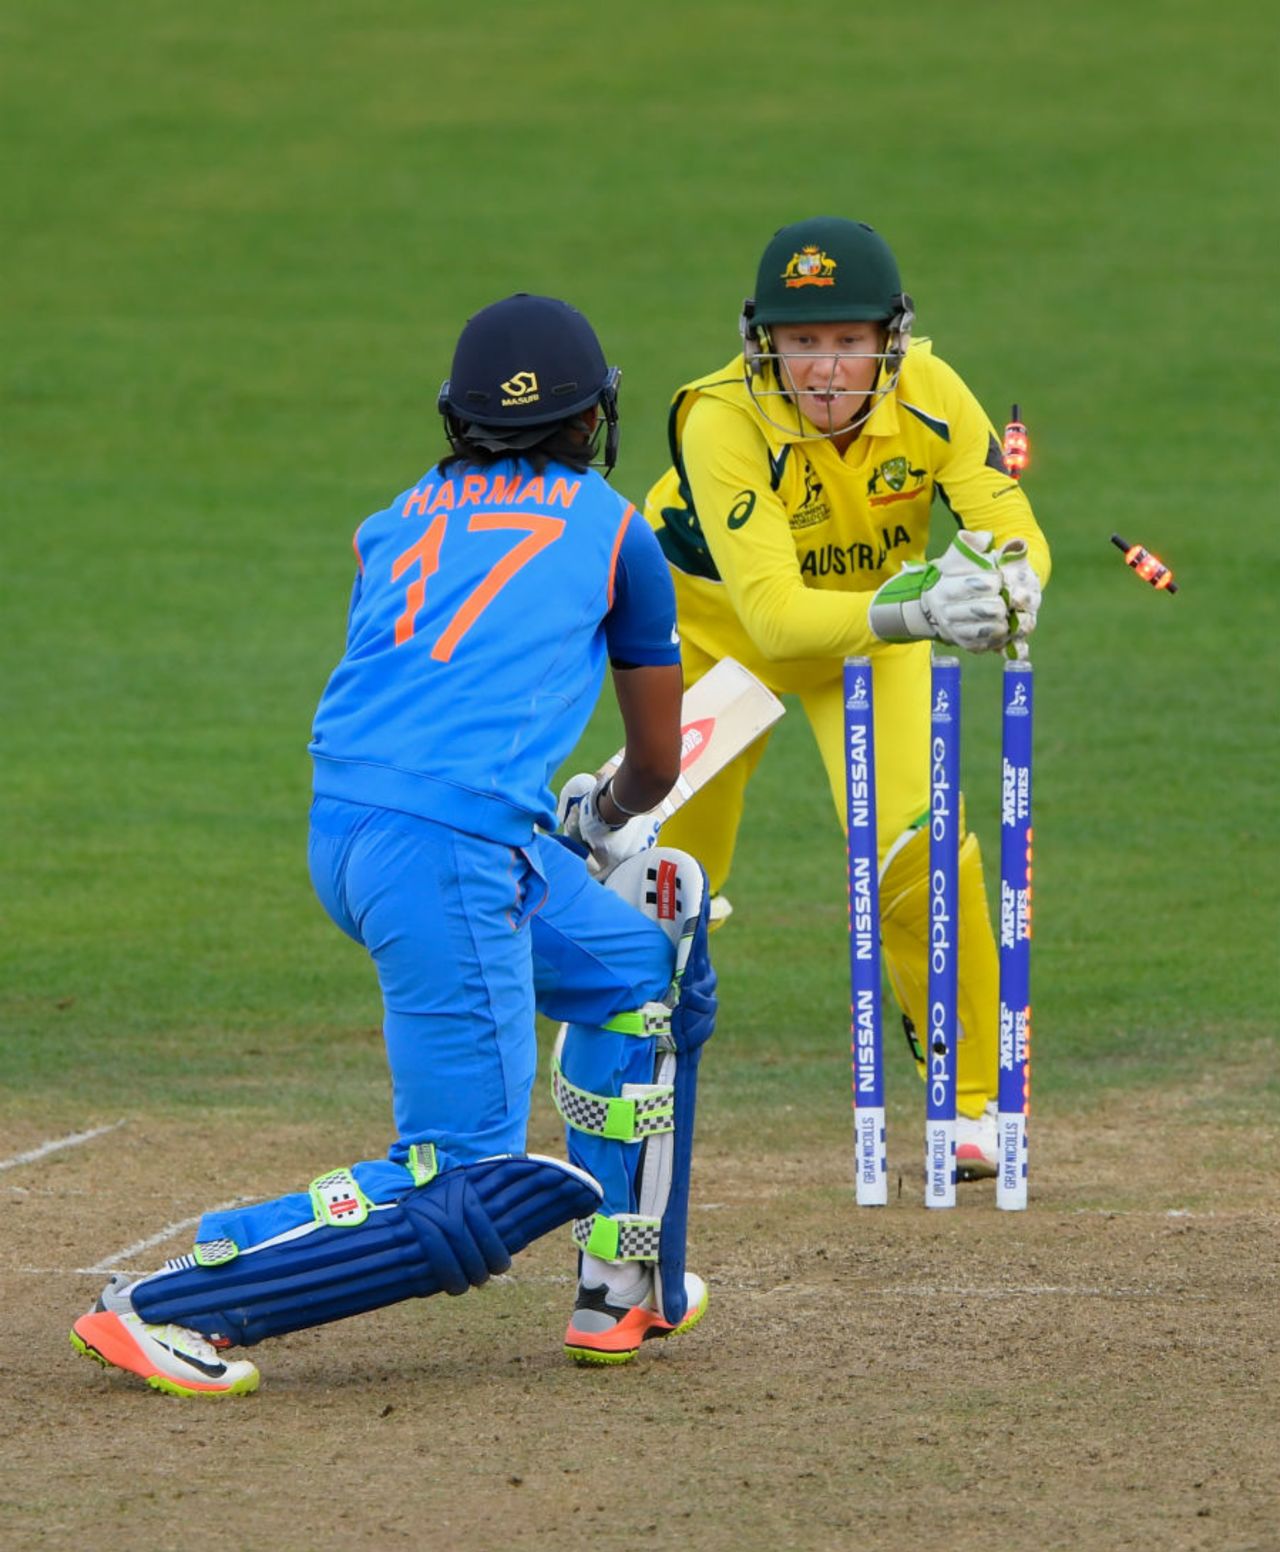 India lost a clutch of wickets after a mammoth second-wicket stand, Australia v India, Women's World Cup, Bristol, July 12, 2017